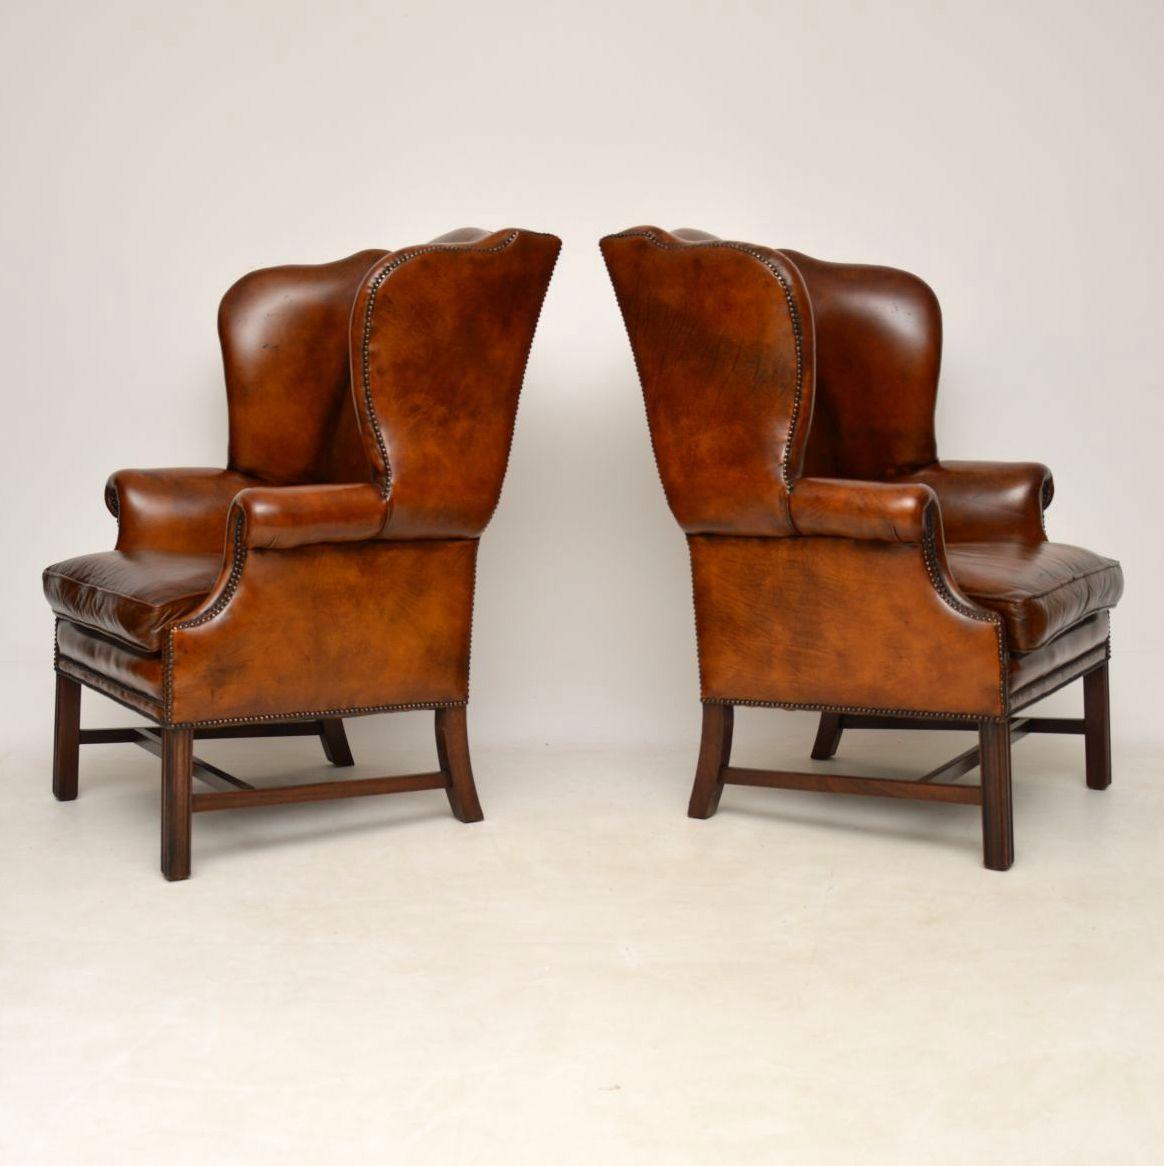 This very impressive large pair of antique leather & mahogany wing armchairs have very generous proportions & are extremely comfortable. They also have a lovely naturally aged colour to the original leather & there are no rips, tears or holes. This